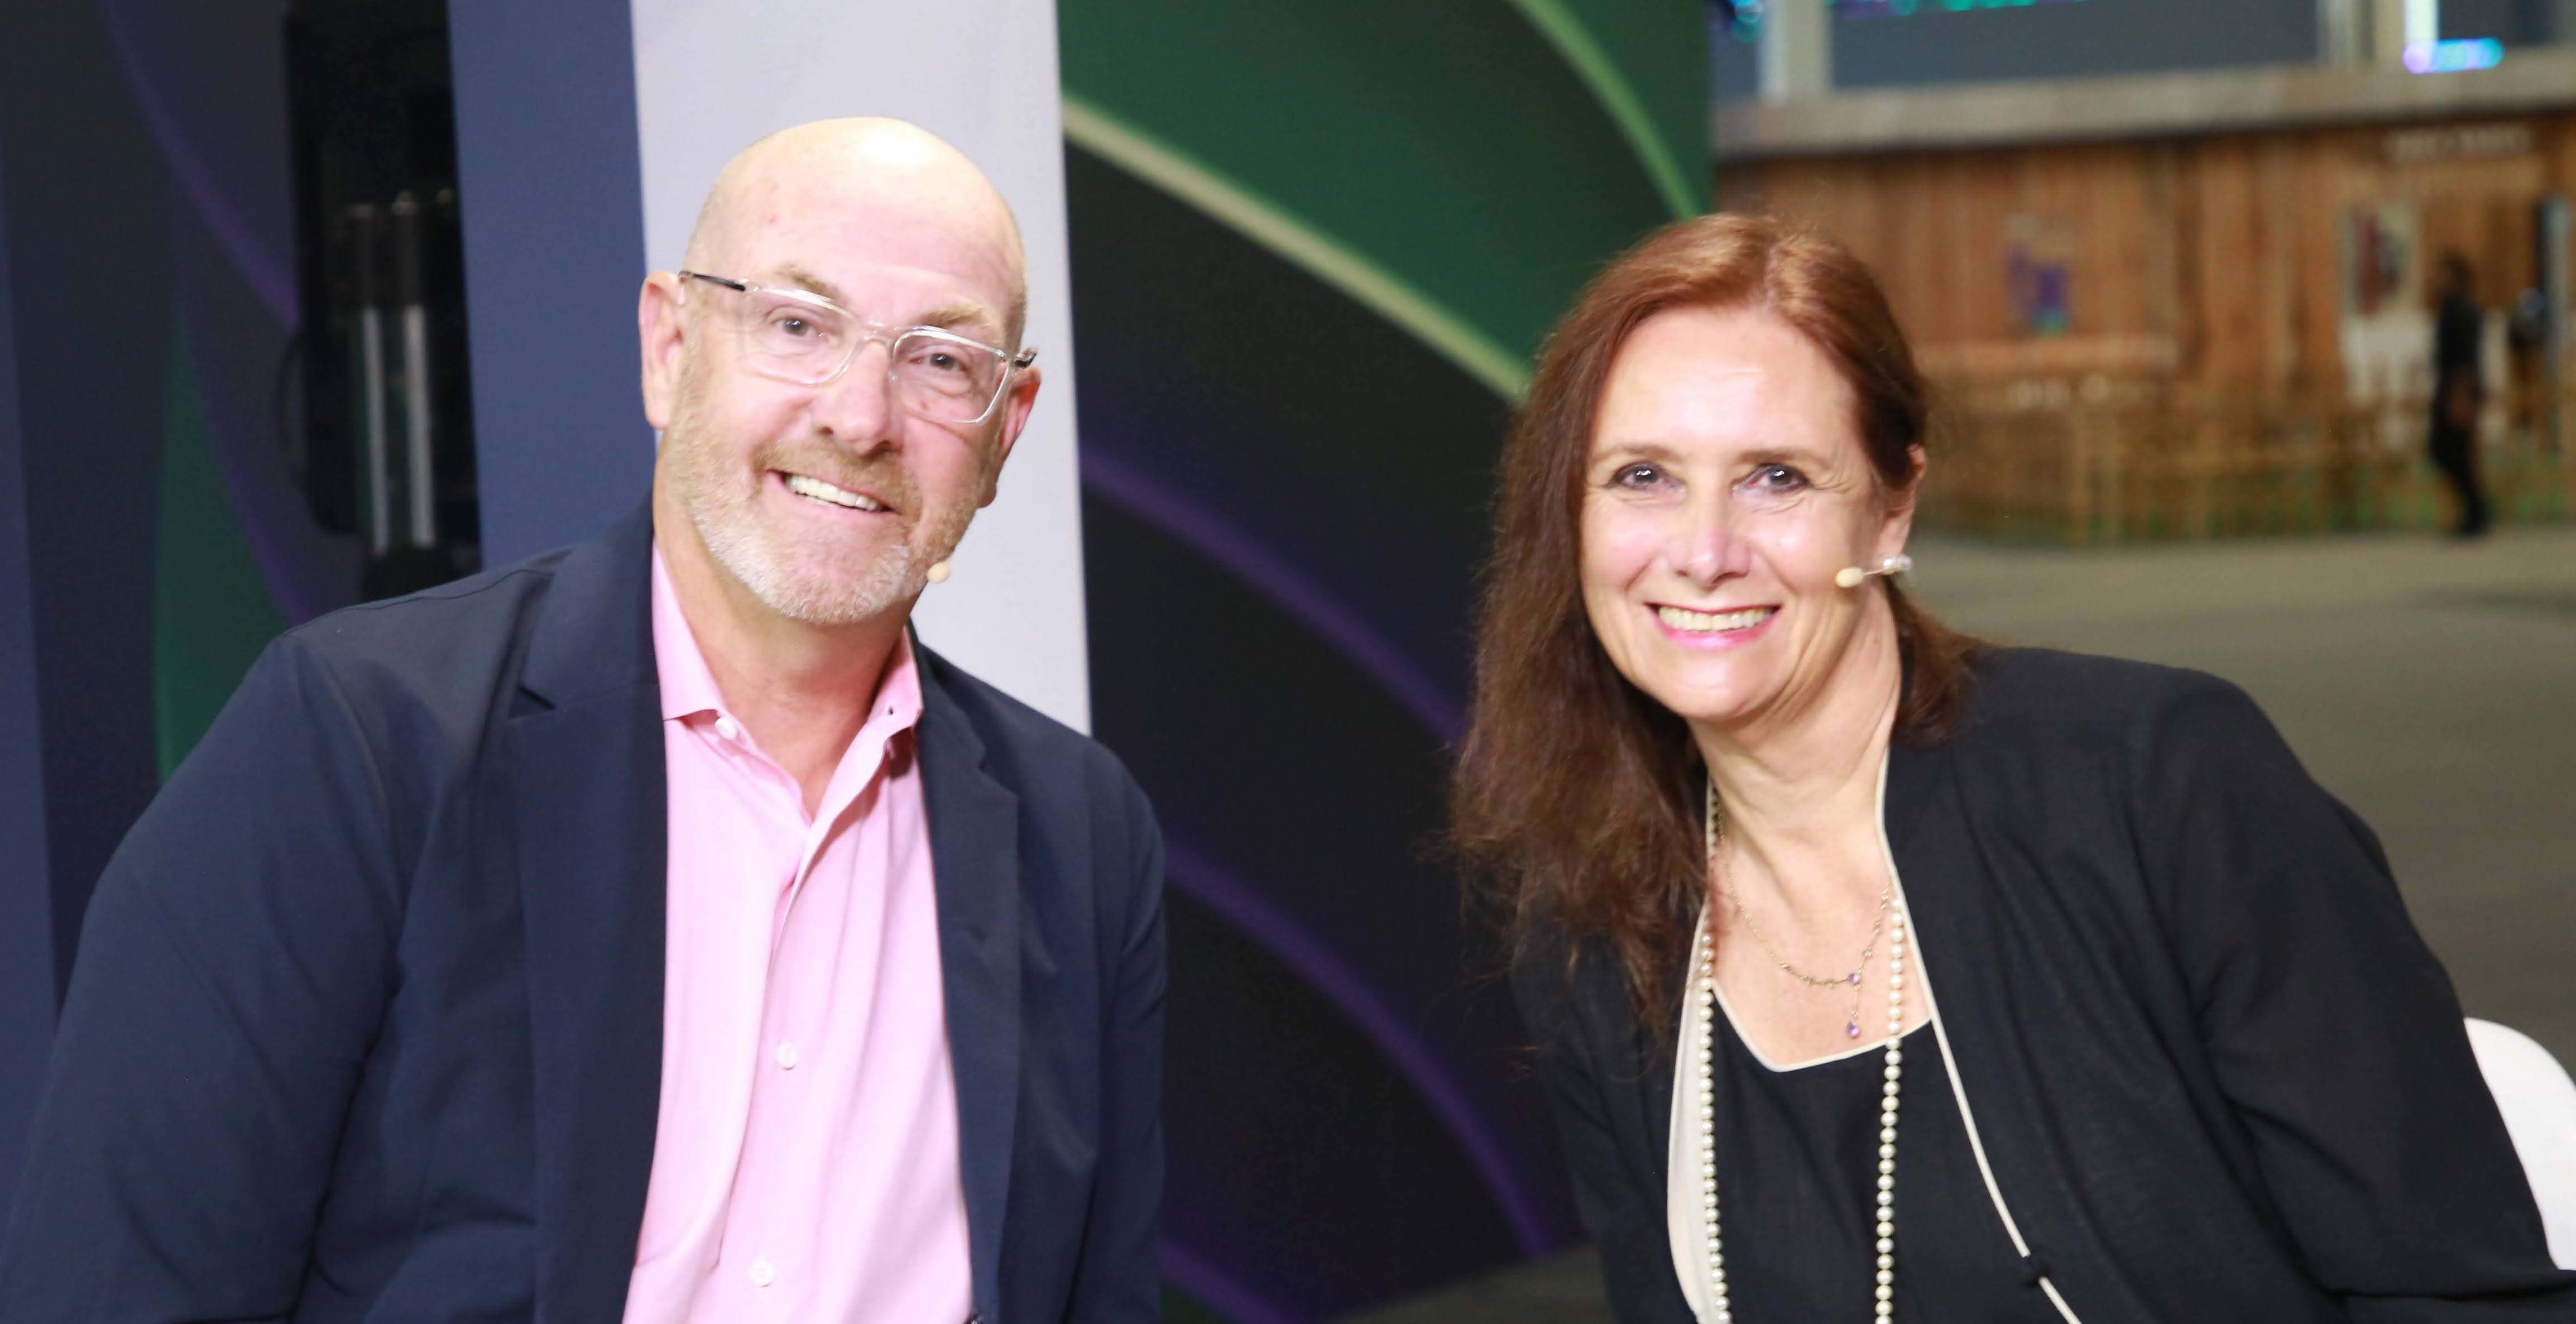 John-Schultz-and-Kay-Firth-Butterfield-HPE-Discover-1.jpeg